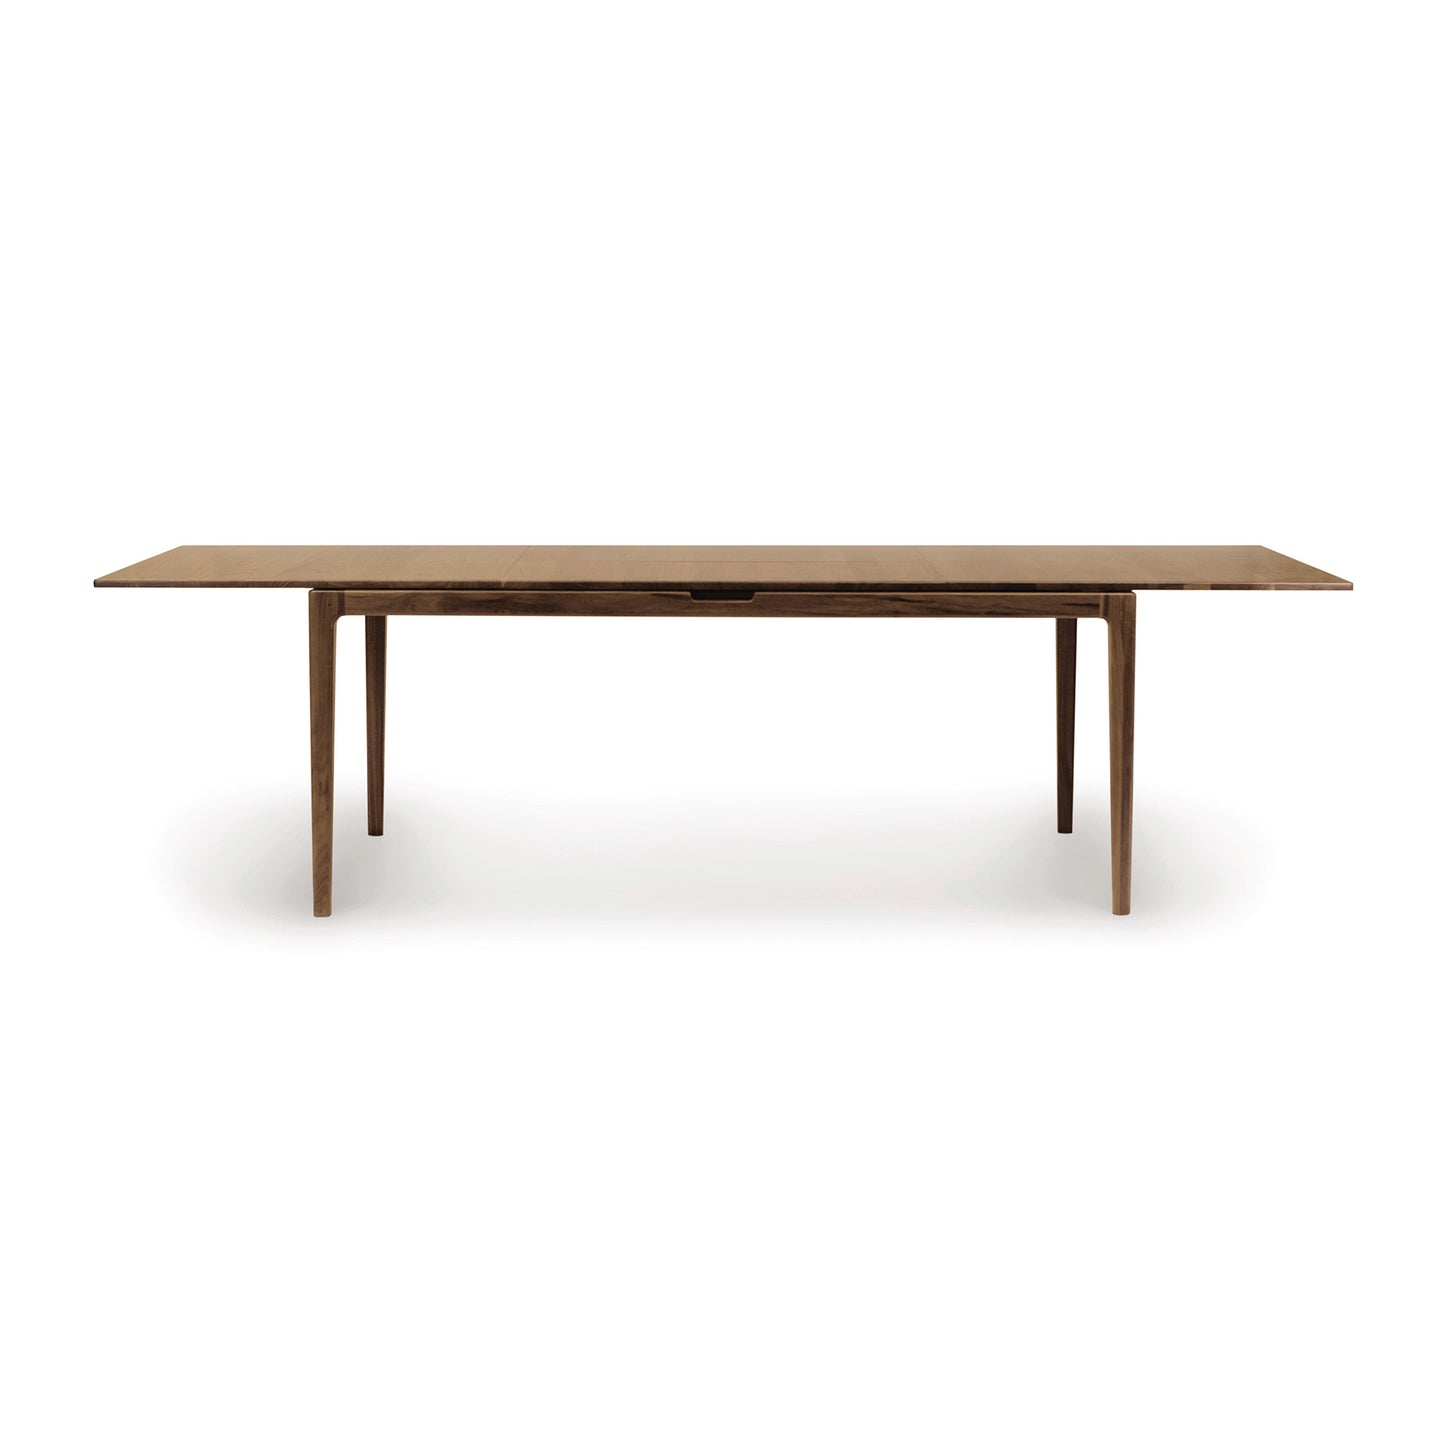 An eco-friendly Lisse Extension Dining Table, crafted from solid walnut construction, with thin legs on a white background by Copeland Furniture.